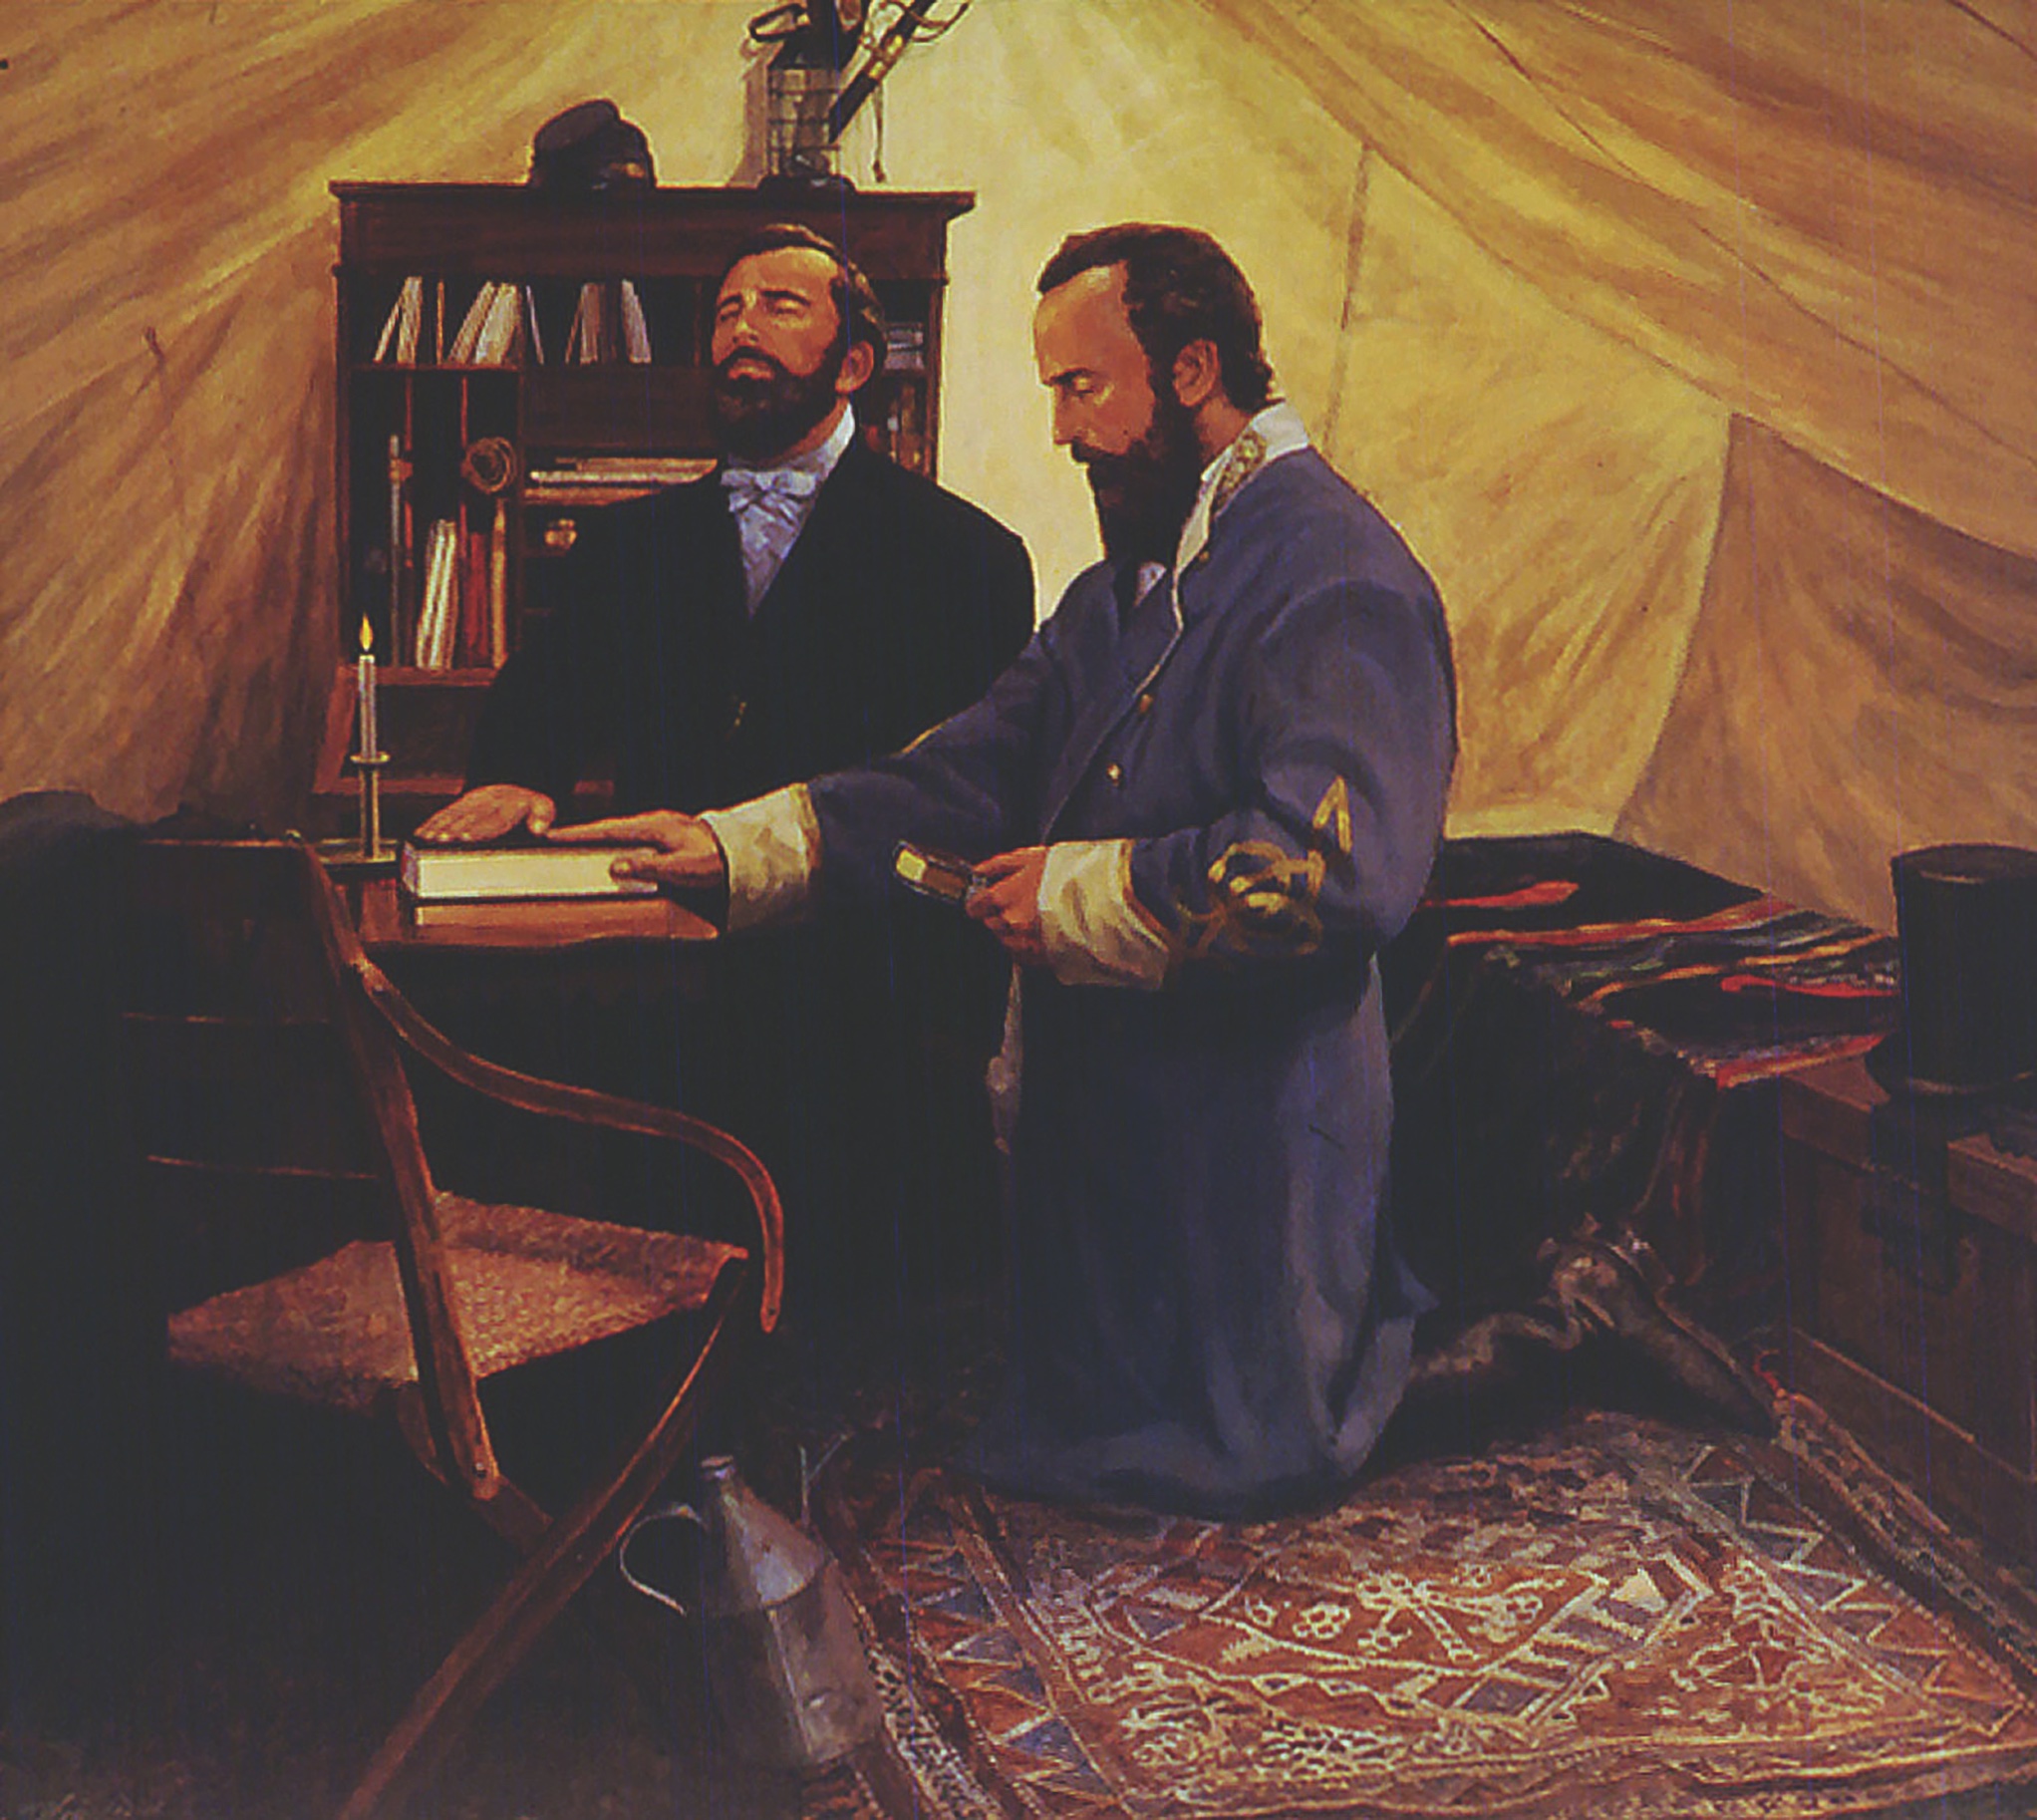 This painting portrays “Stonewall” Jackson praying with his chaplain, the Reverend Beverly Tucker Lacy, in December 1862. Jackson’s religious fervor is celebrated, while McClellan’s has been disdained. (“General and his Chaplain” by Dale Gallon, www.gallon.com)